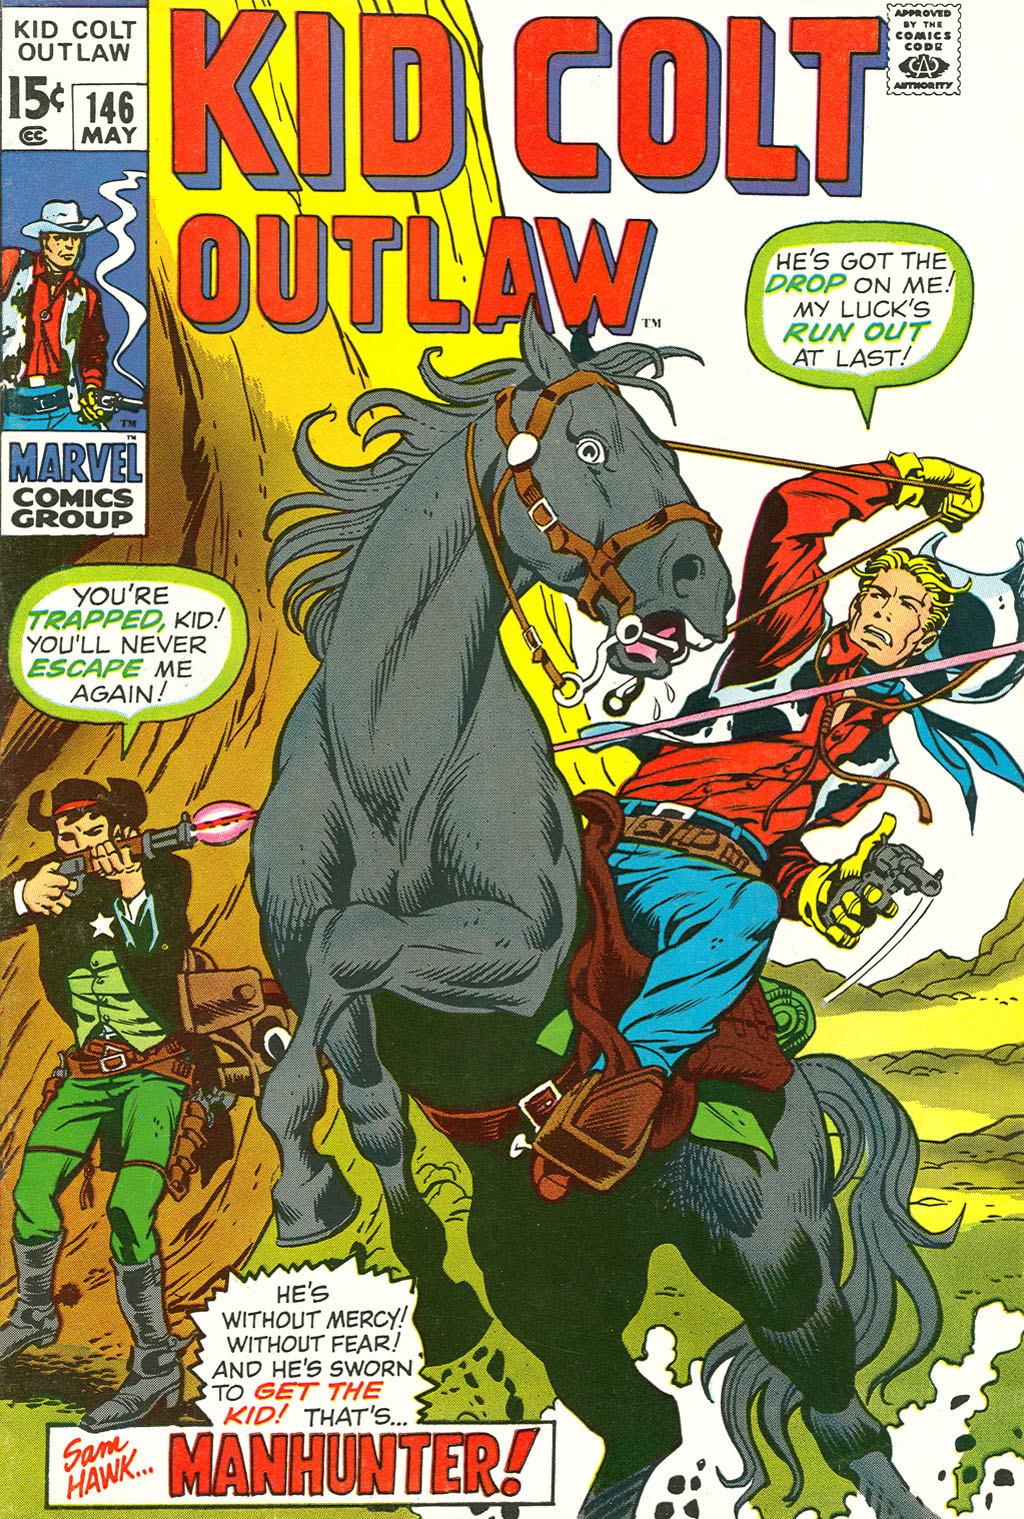 Read online Kid Colt Outlaw comic -  Issue #146 - 1